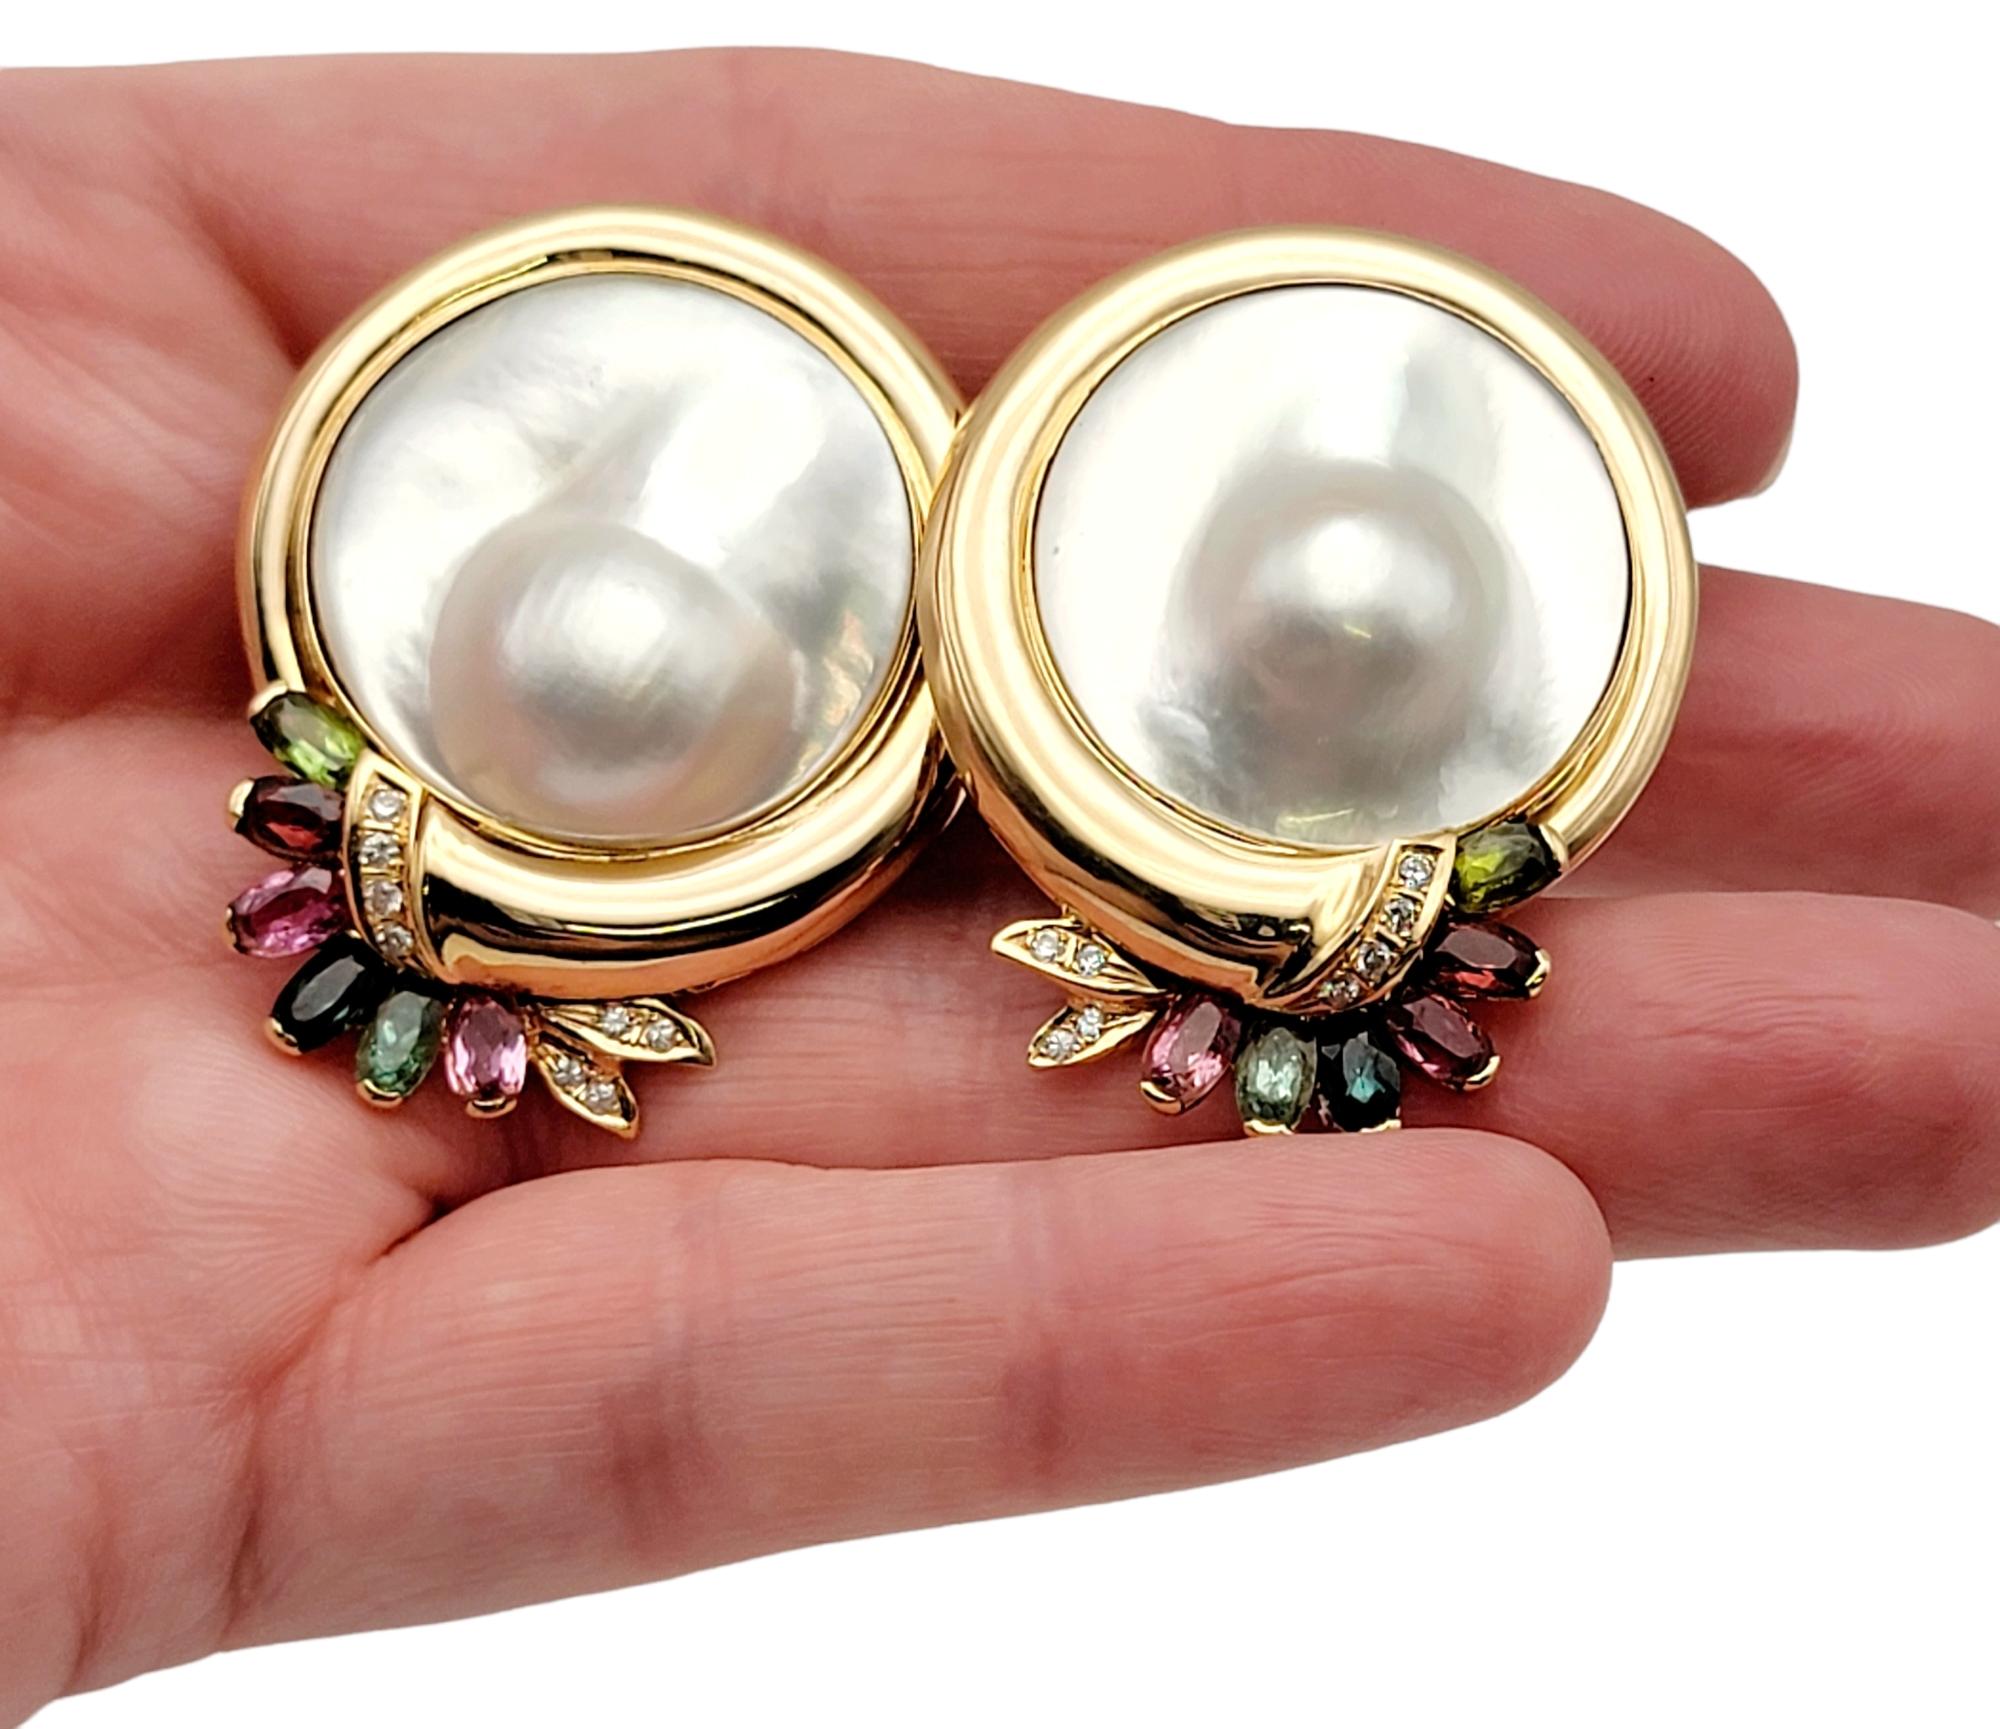 Cultured Mabe Blistered Pearl 14 Karat Gold Earrings with Diamonds and Gemstones For Sale 1